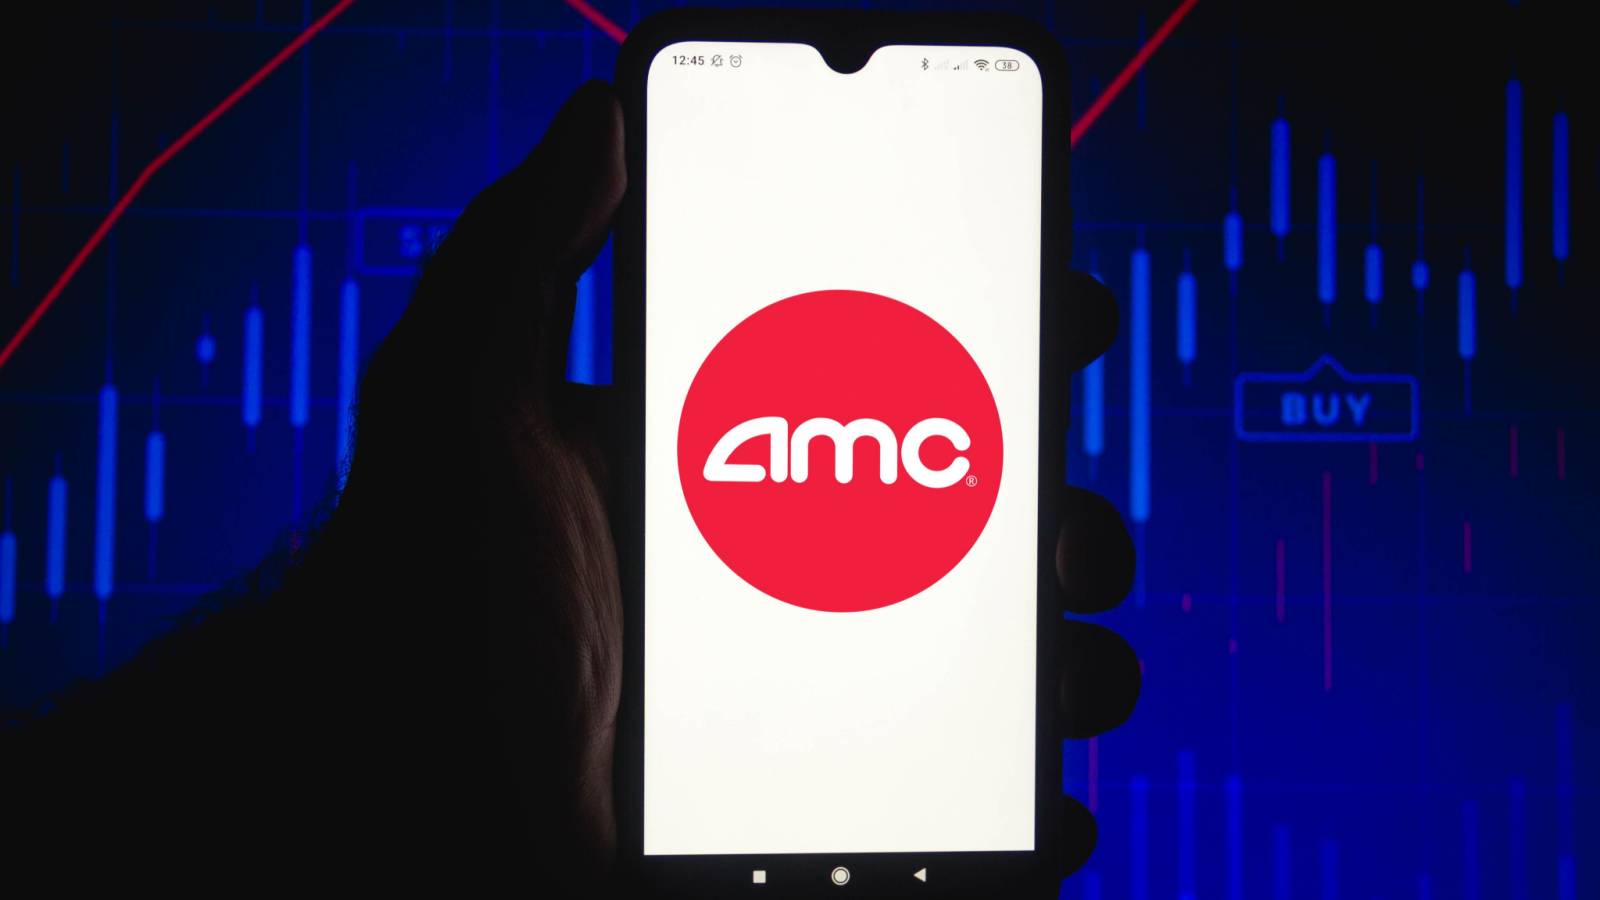 AMC Stock: Why AMC Entertainment Continues to Tumble